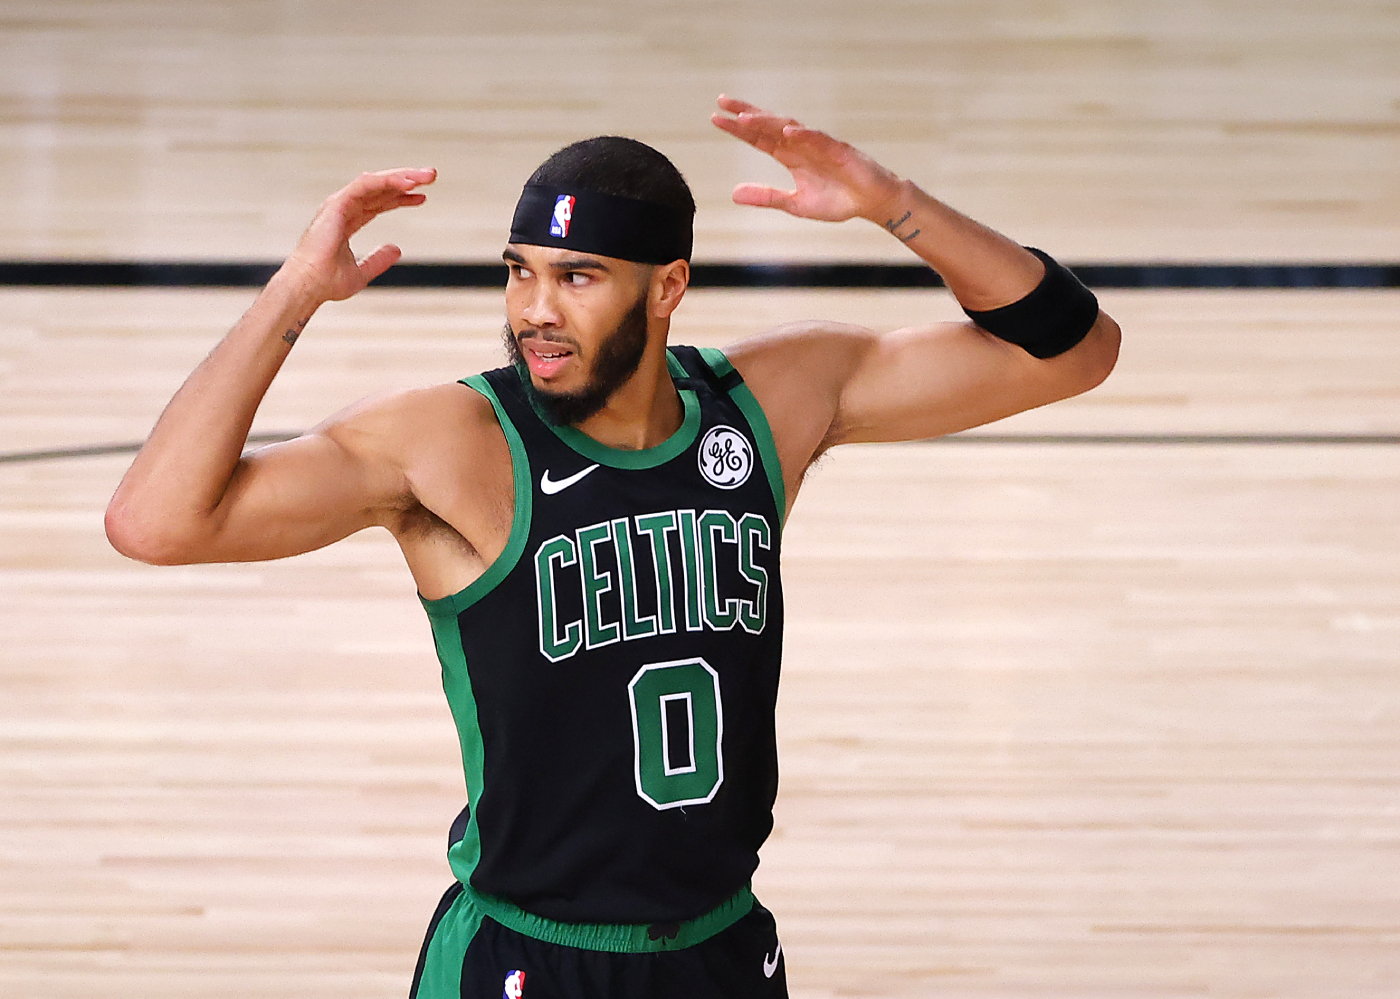 Jayson Tatum had an excellent season with the Boston Celtics. However, before losing to the Heat he made a questionable decision.